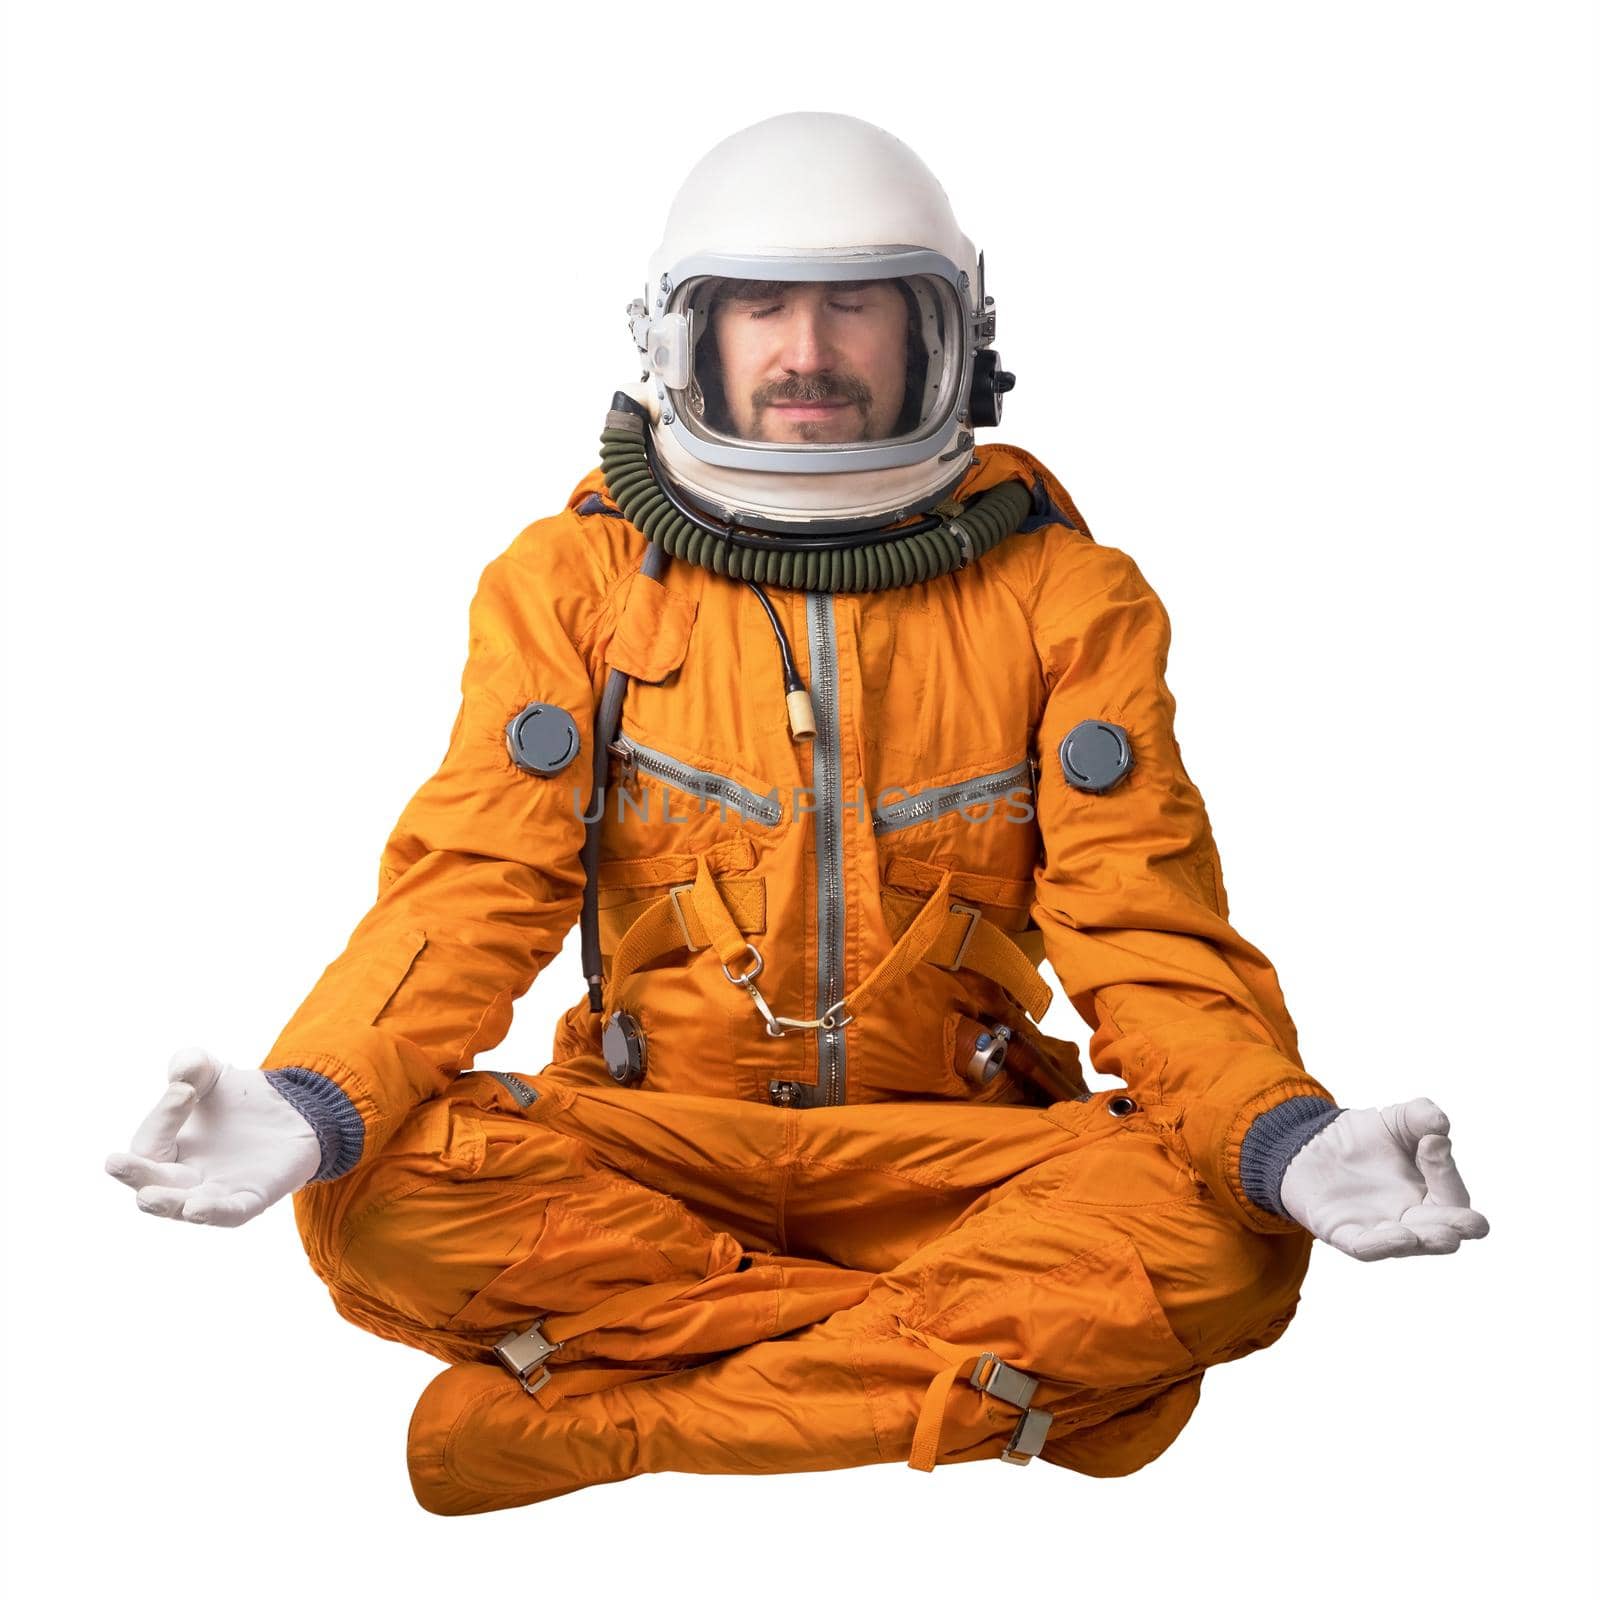 Astronaut wearing orange space suit and space helmet sitting in a lotus pose meditating isolated on a white background. Meditation concept by dmitryz